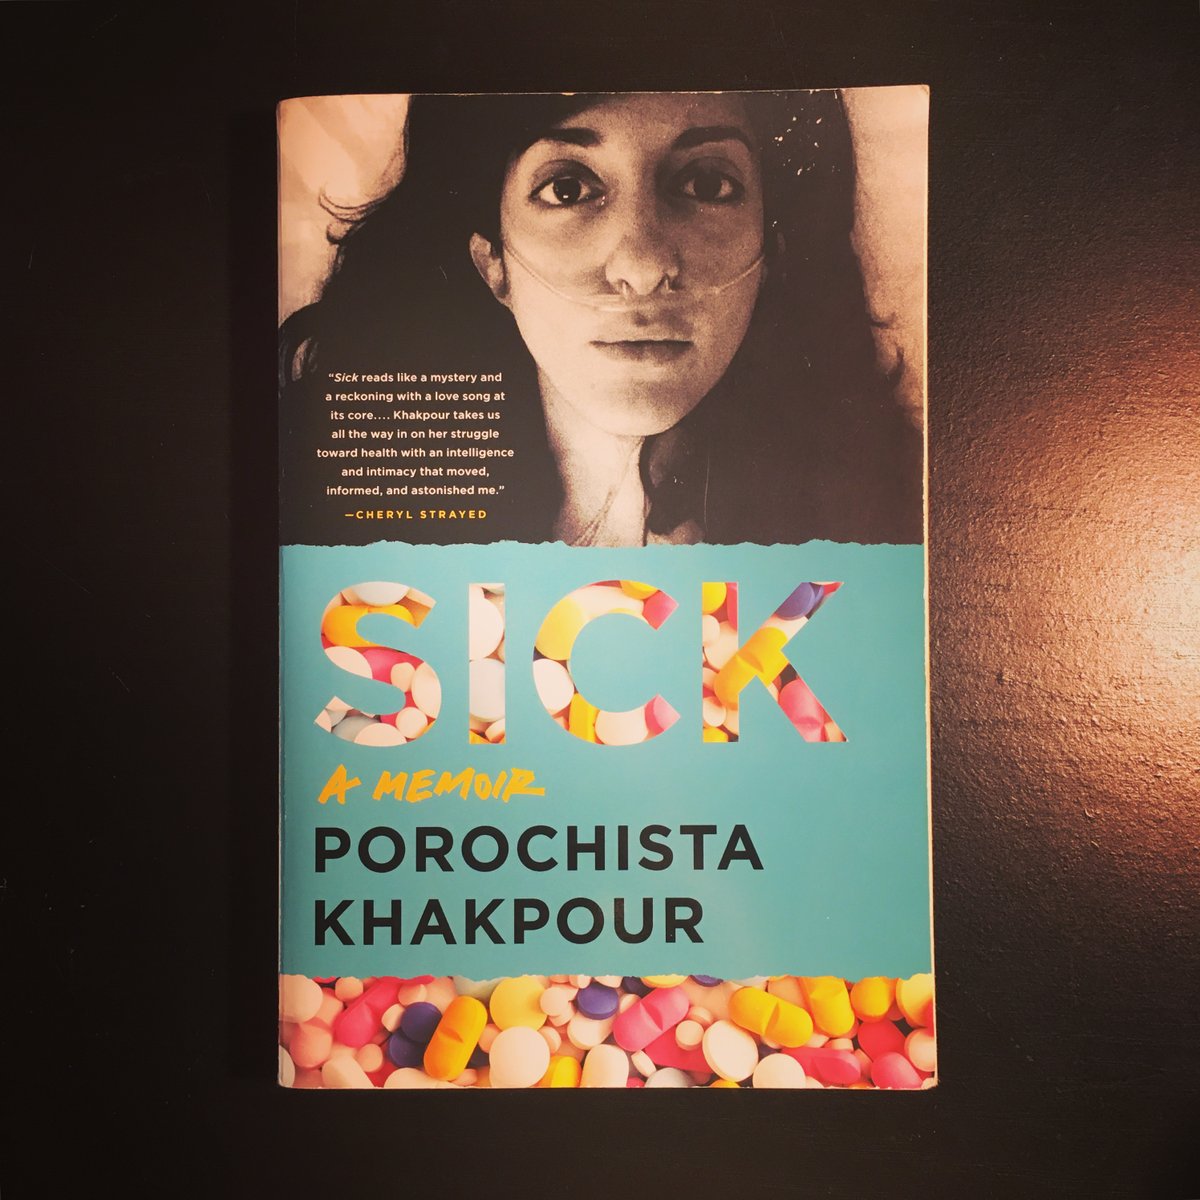 feels like months between these posts but here's another  #travelbanbooks /  #travelbanwriters rec: SICK by Iranian-American  @PKhakpour. it’s really good & might be appropriate to read now, remembering who is most vulnerable during this pandemic.  #supportiranianwriters  #nobannowall